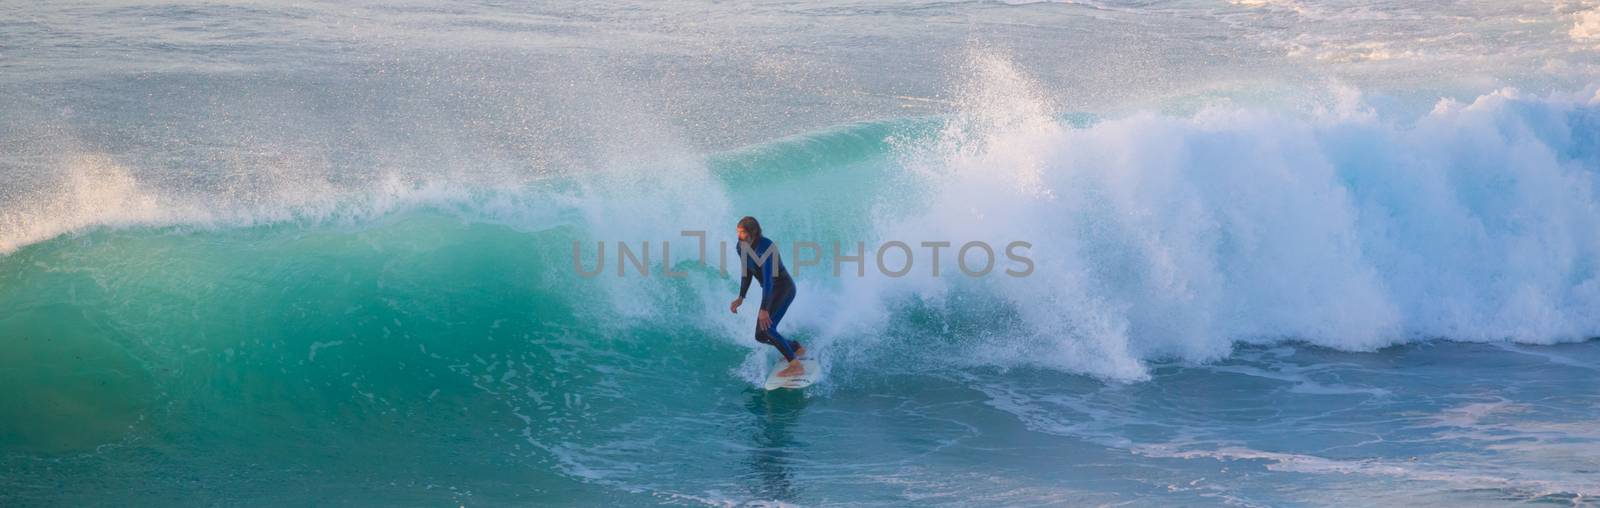 Senior surfer riding a perfect wave. by kasto